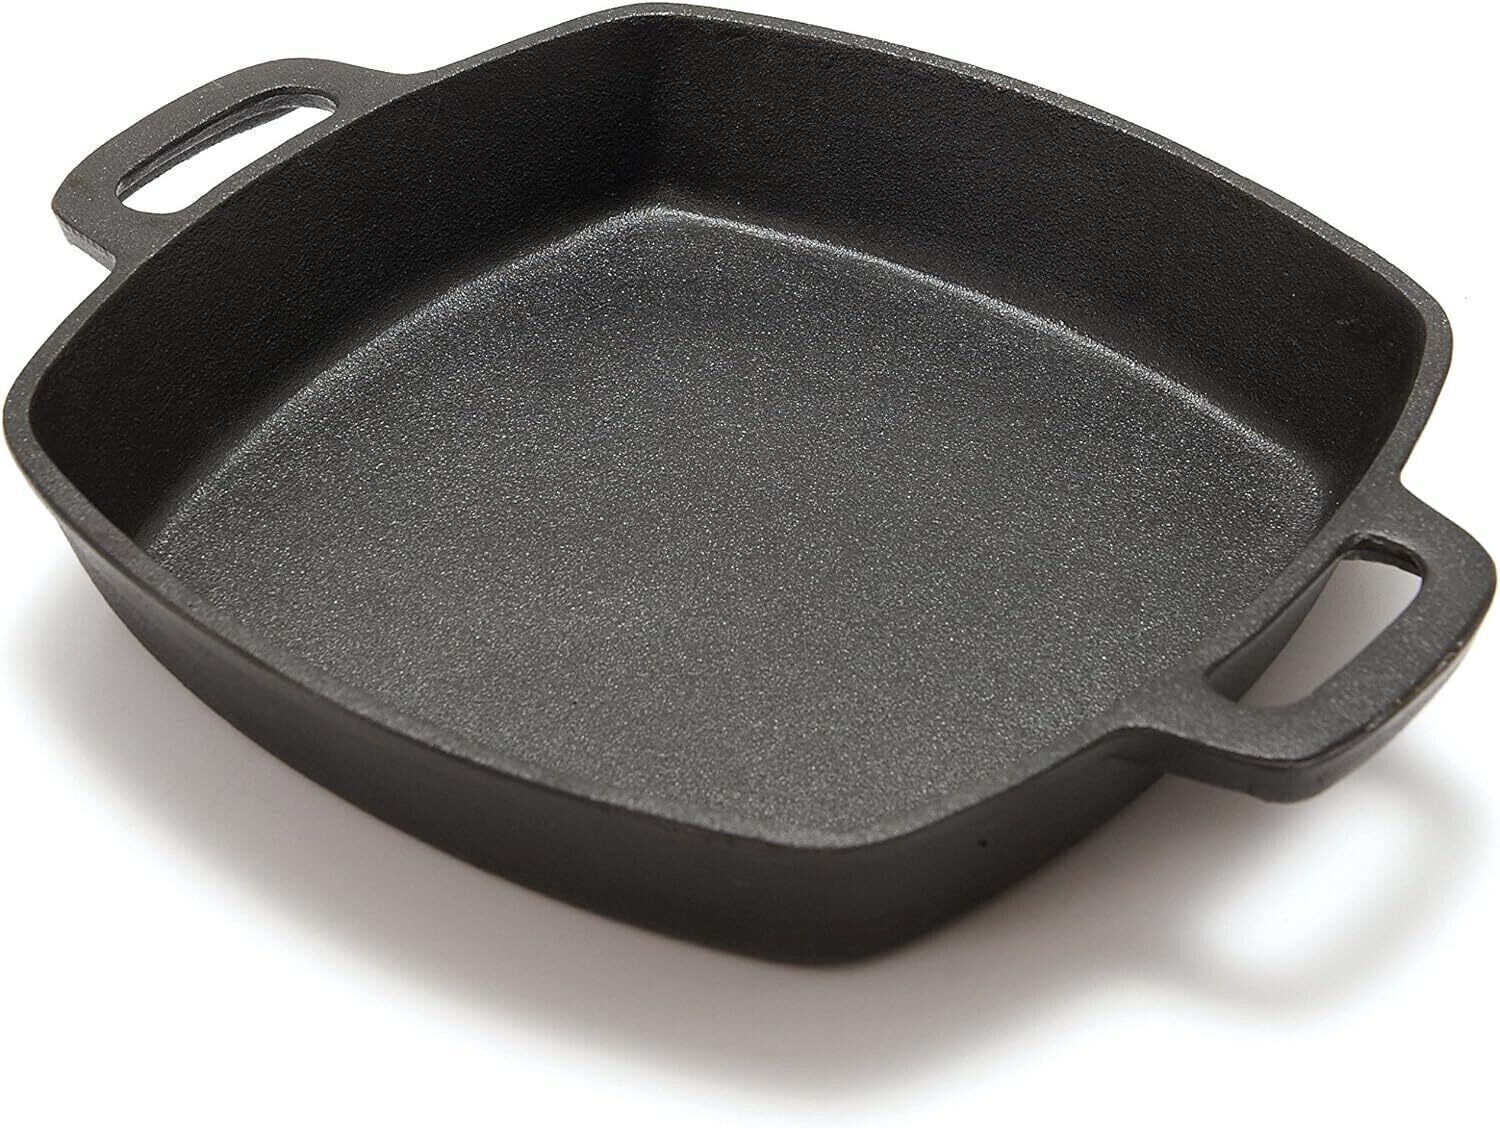 GrillPro 91658 Cast Iron Square Pan